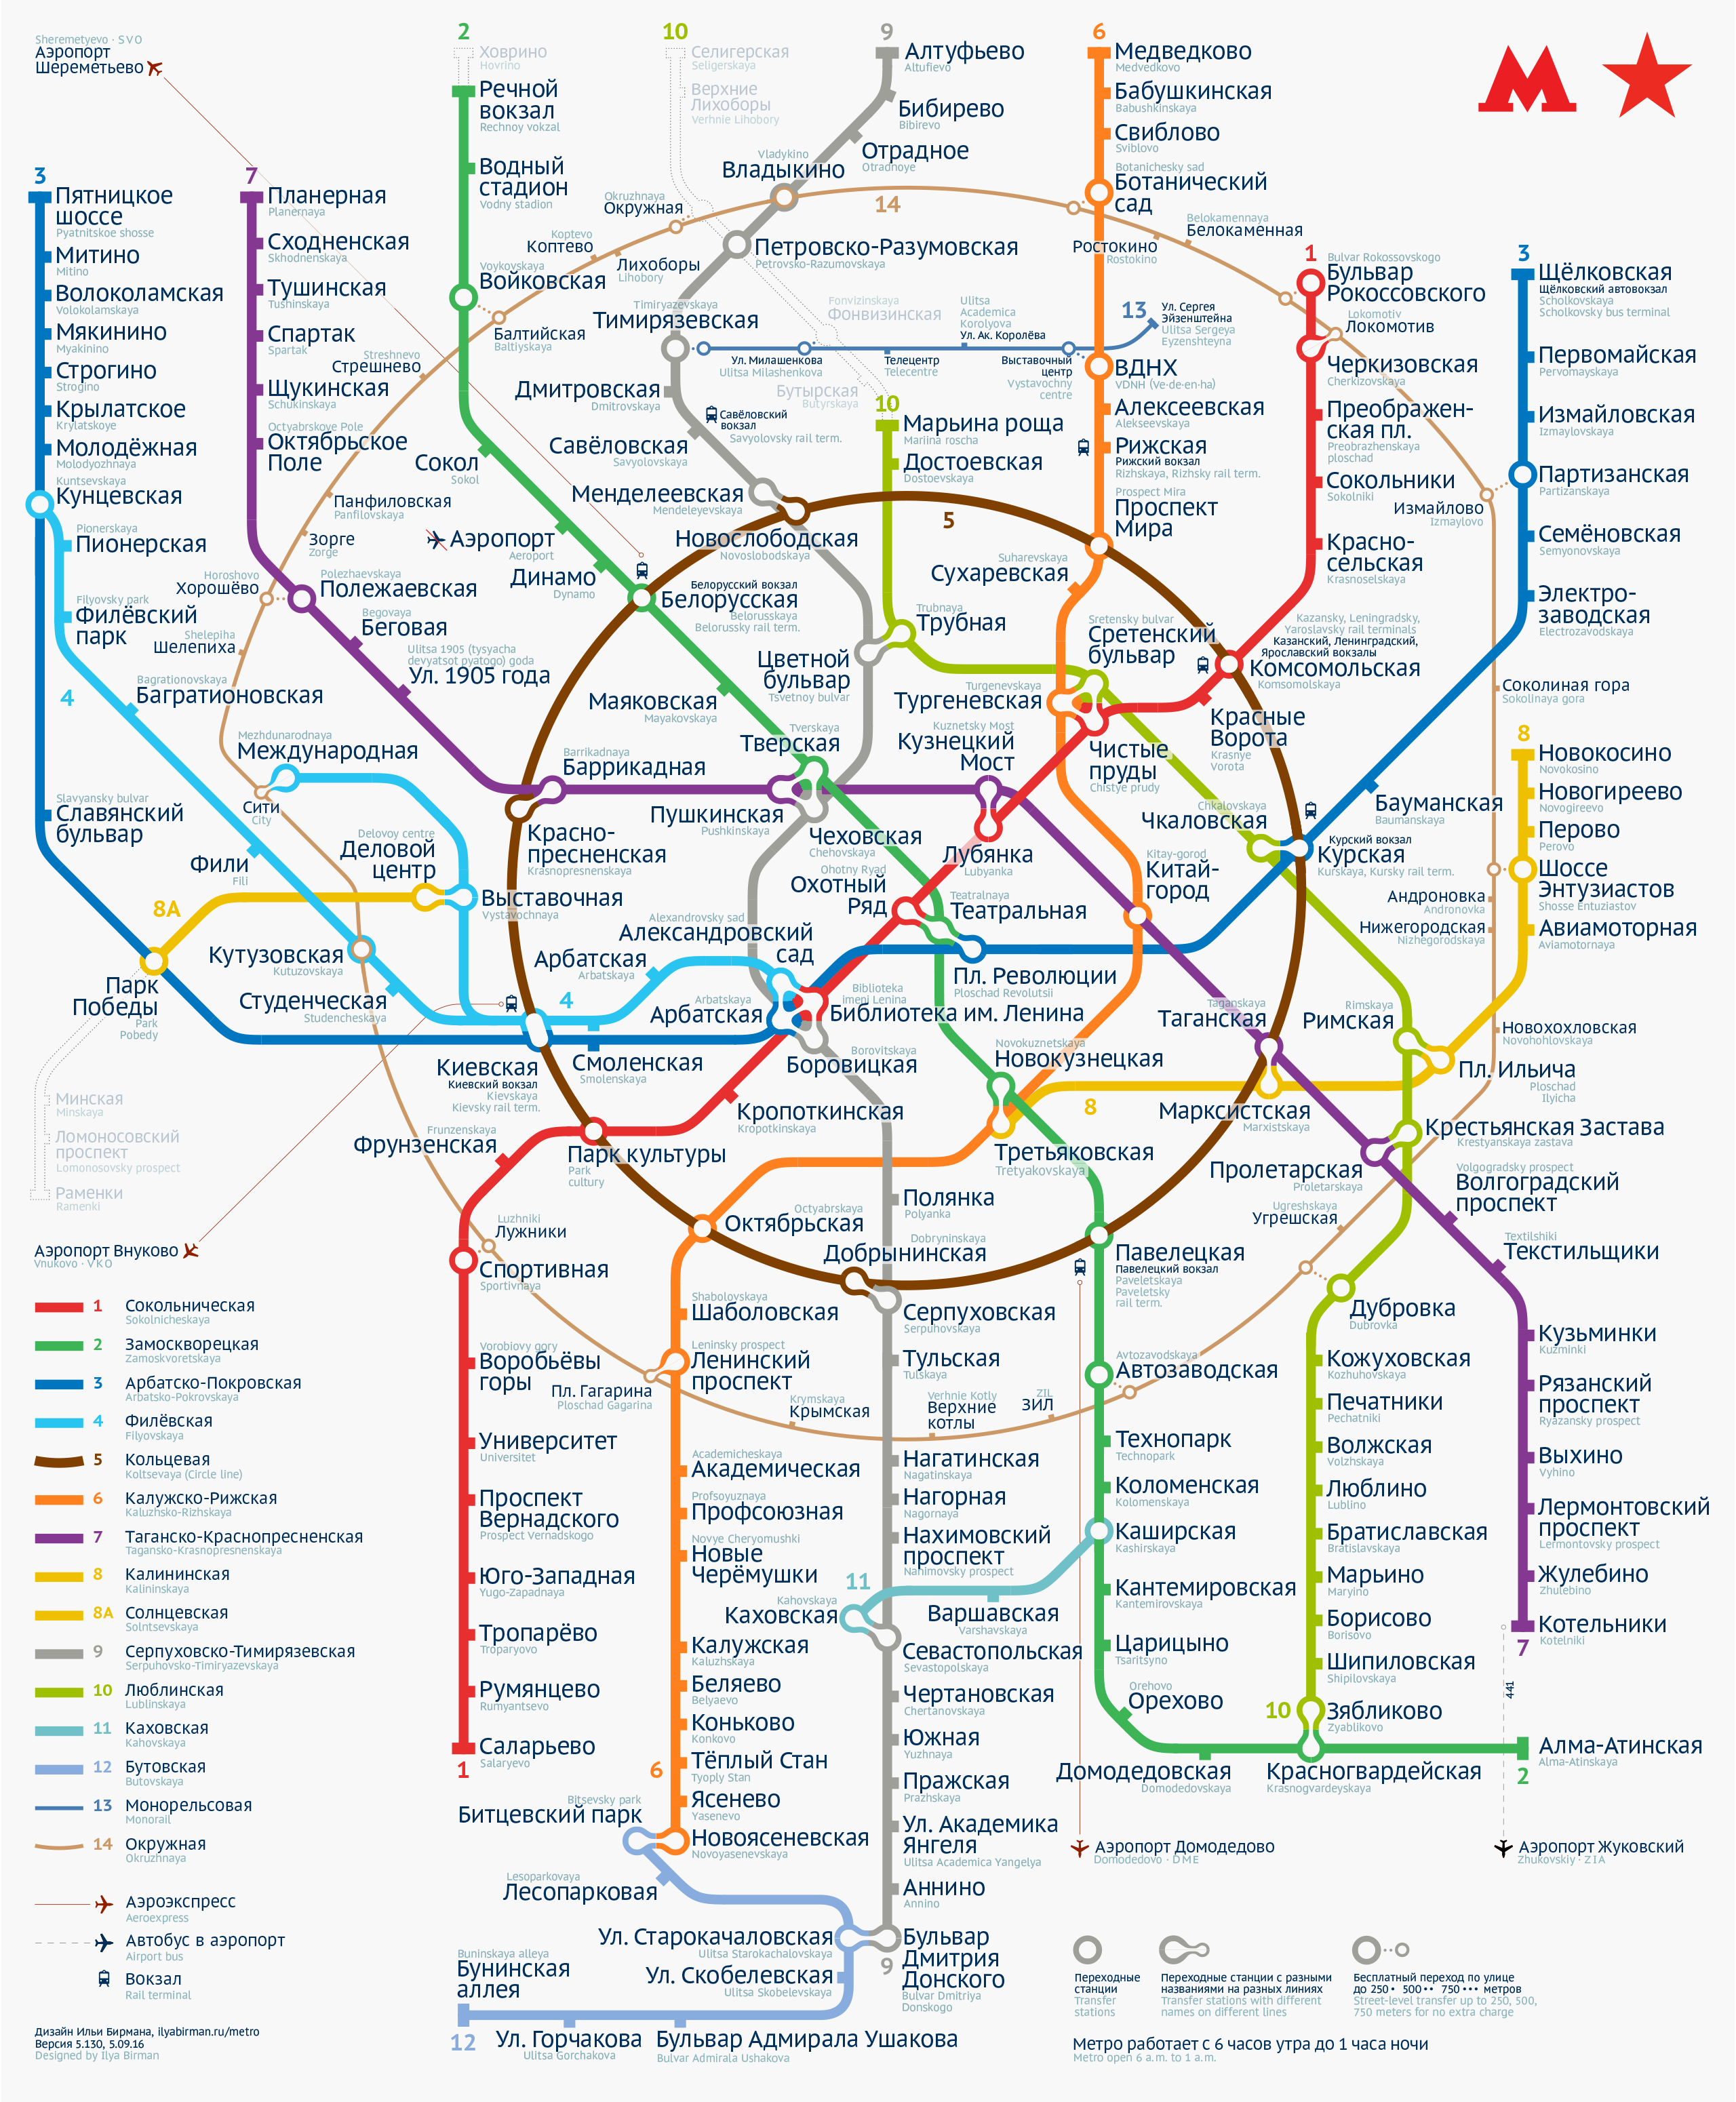 Fifth version of the Moscow Metro map